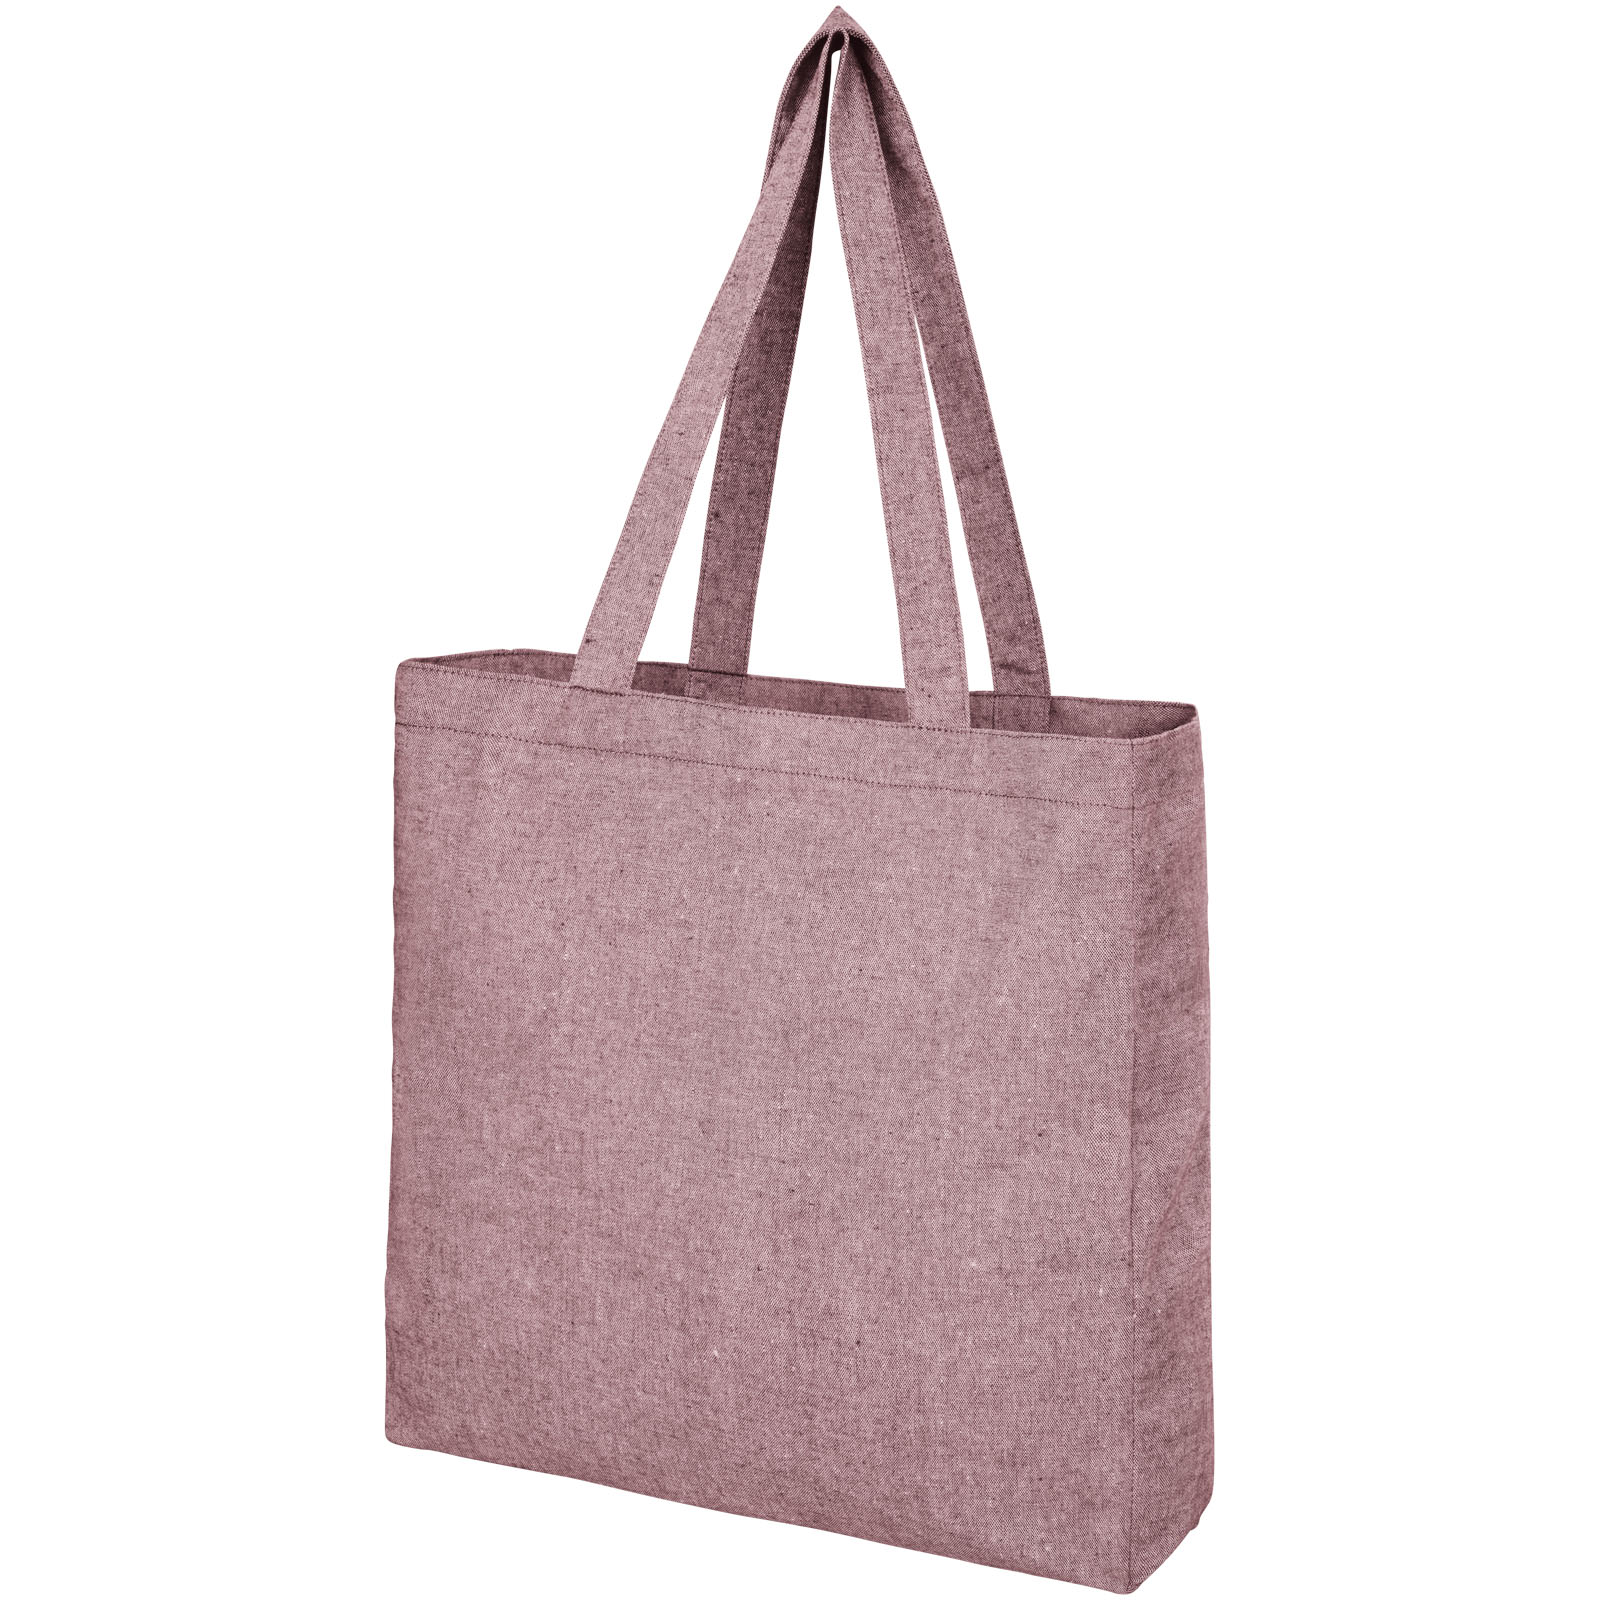 Advertising Shopping & Tote Bags - Pheebs 210 g/m² recycled gusset tote bag 13L